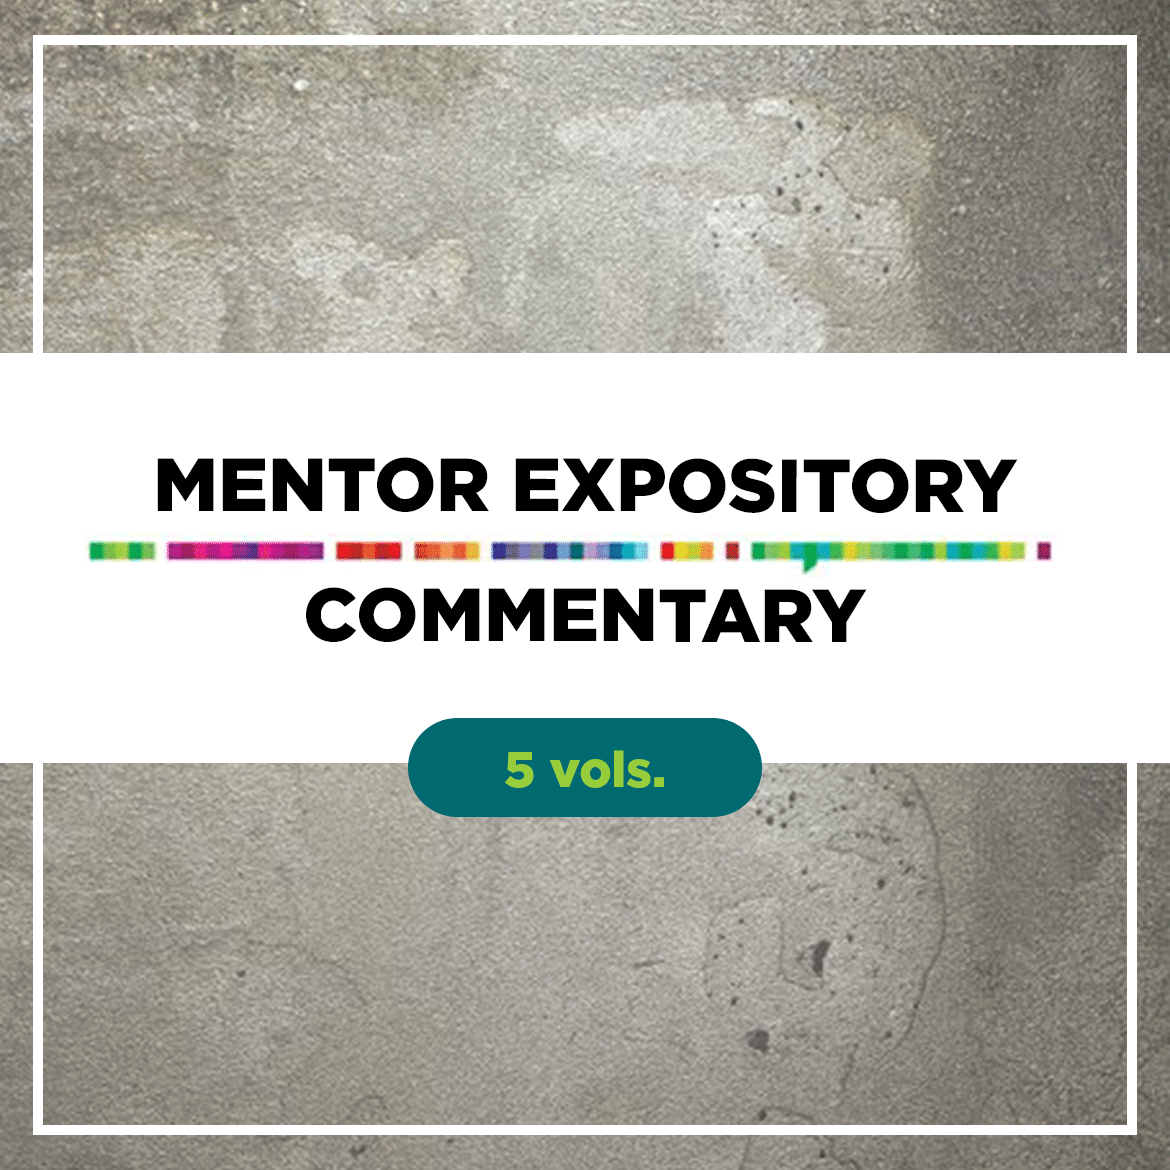 Mentor Expository Commentary (5 vols.)